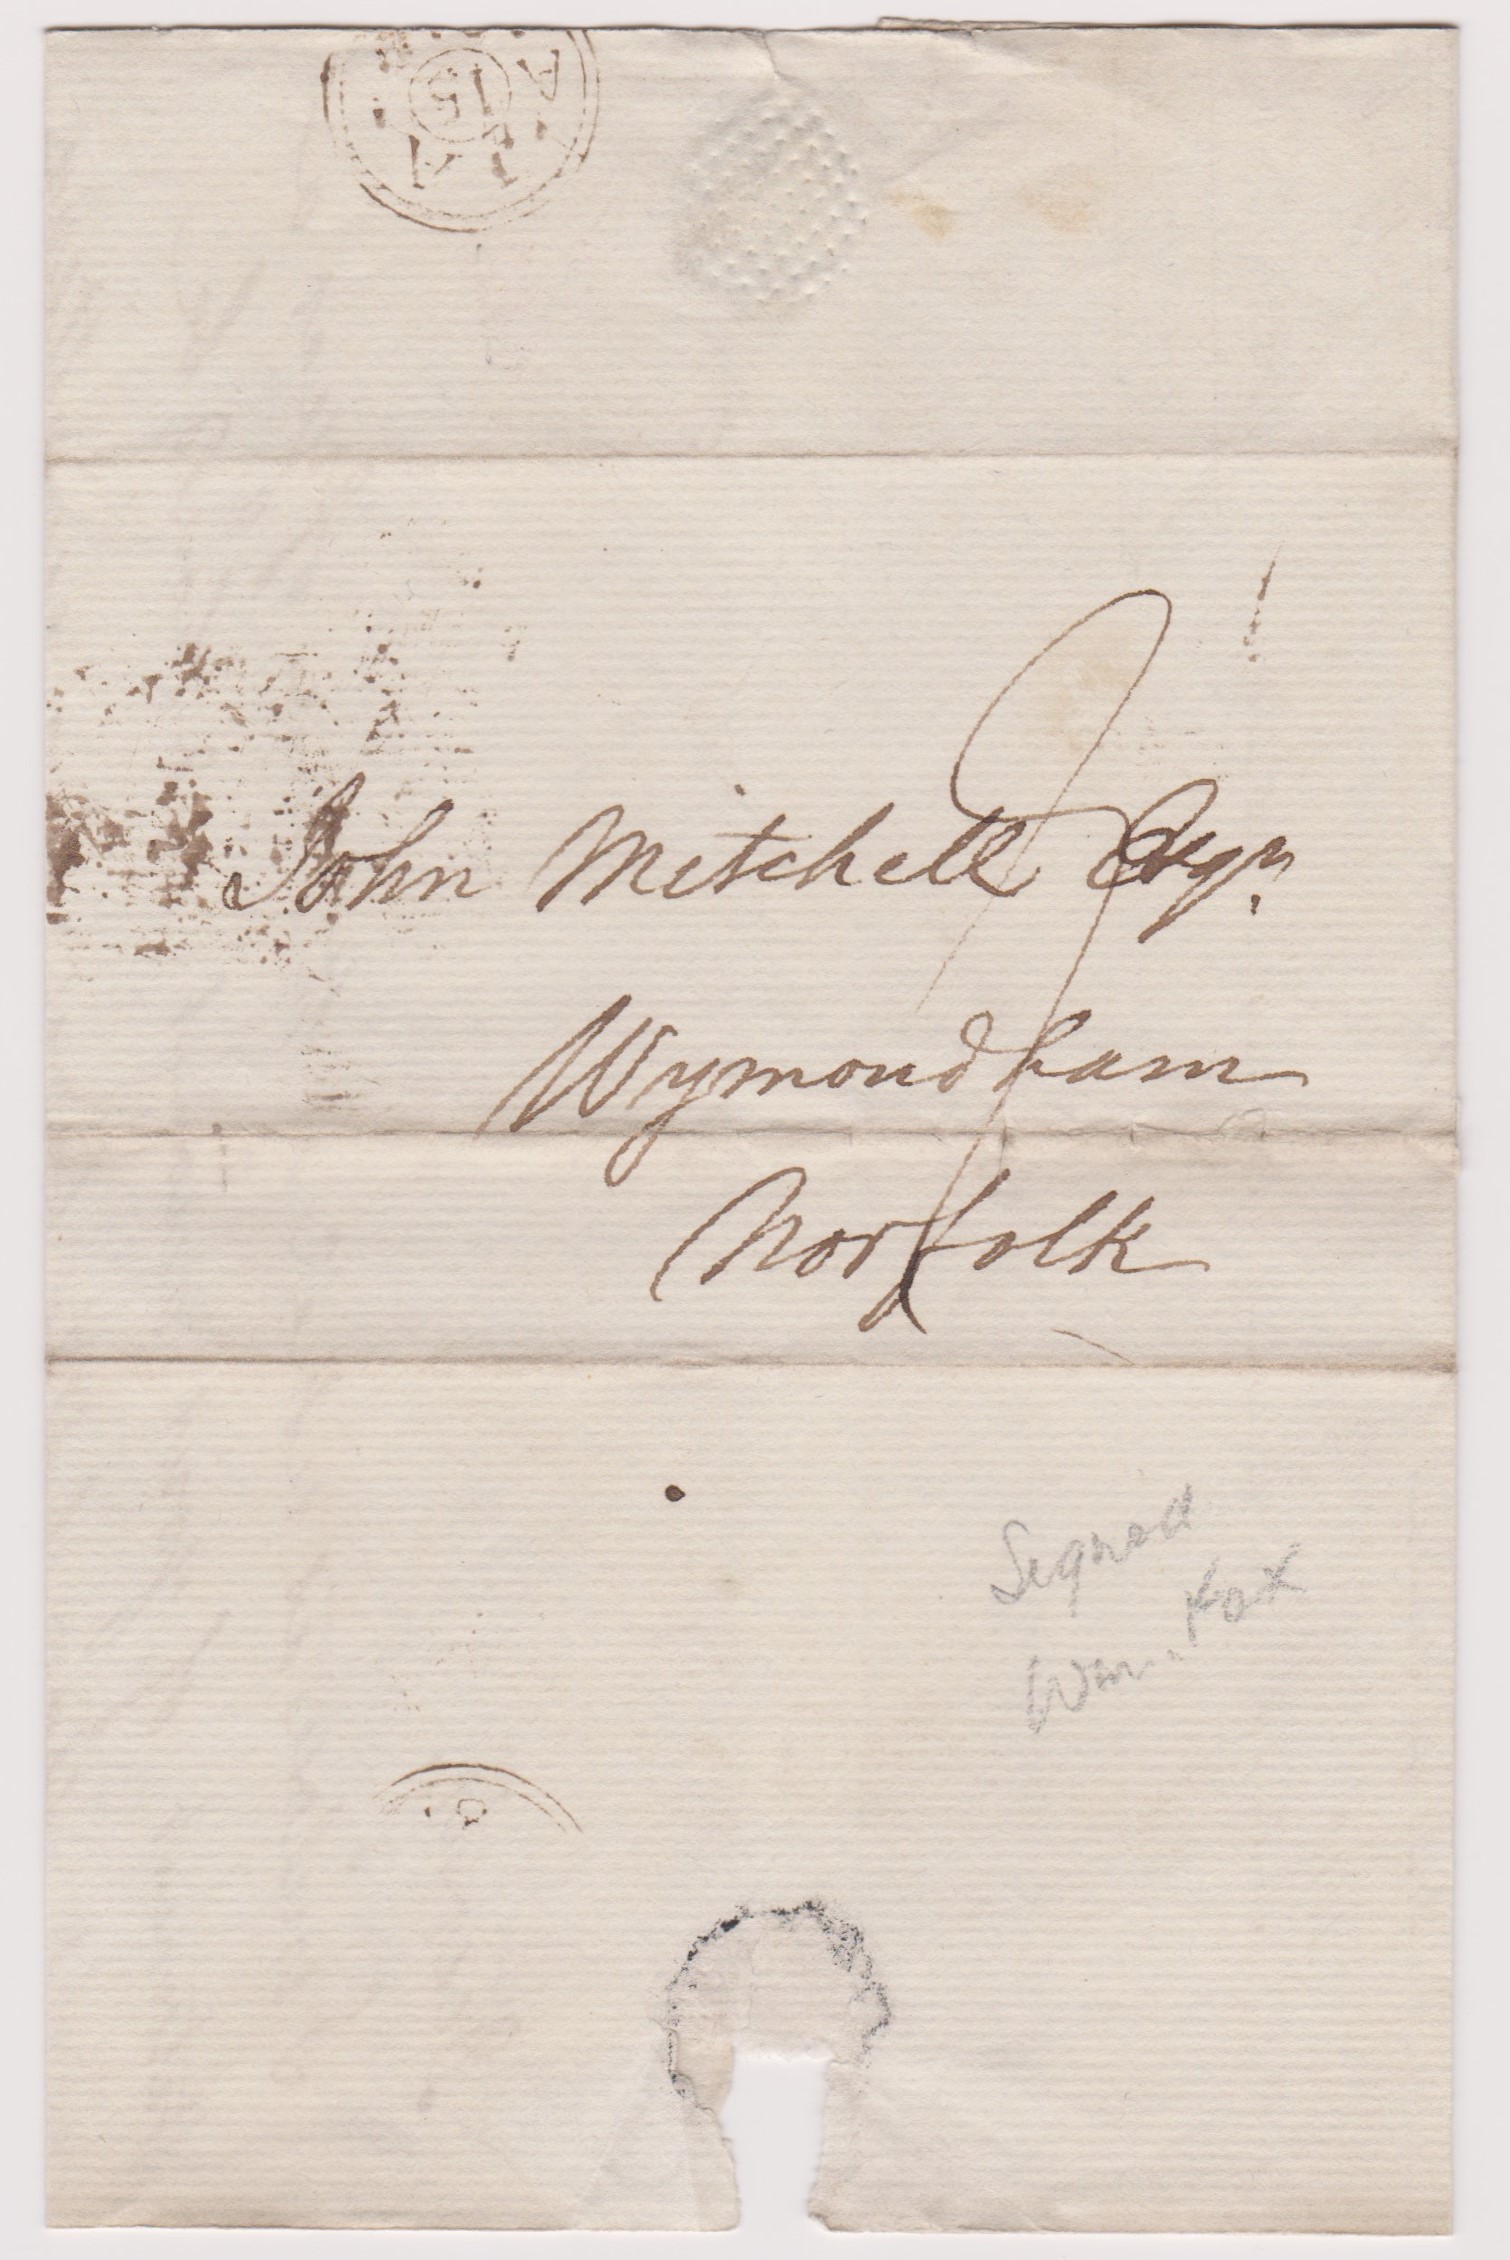 Great Britain 1819 - Postal History EL dated Jan 15th 1819 posted to Wymondham-manuscript a-double